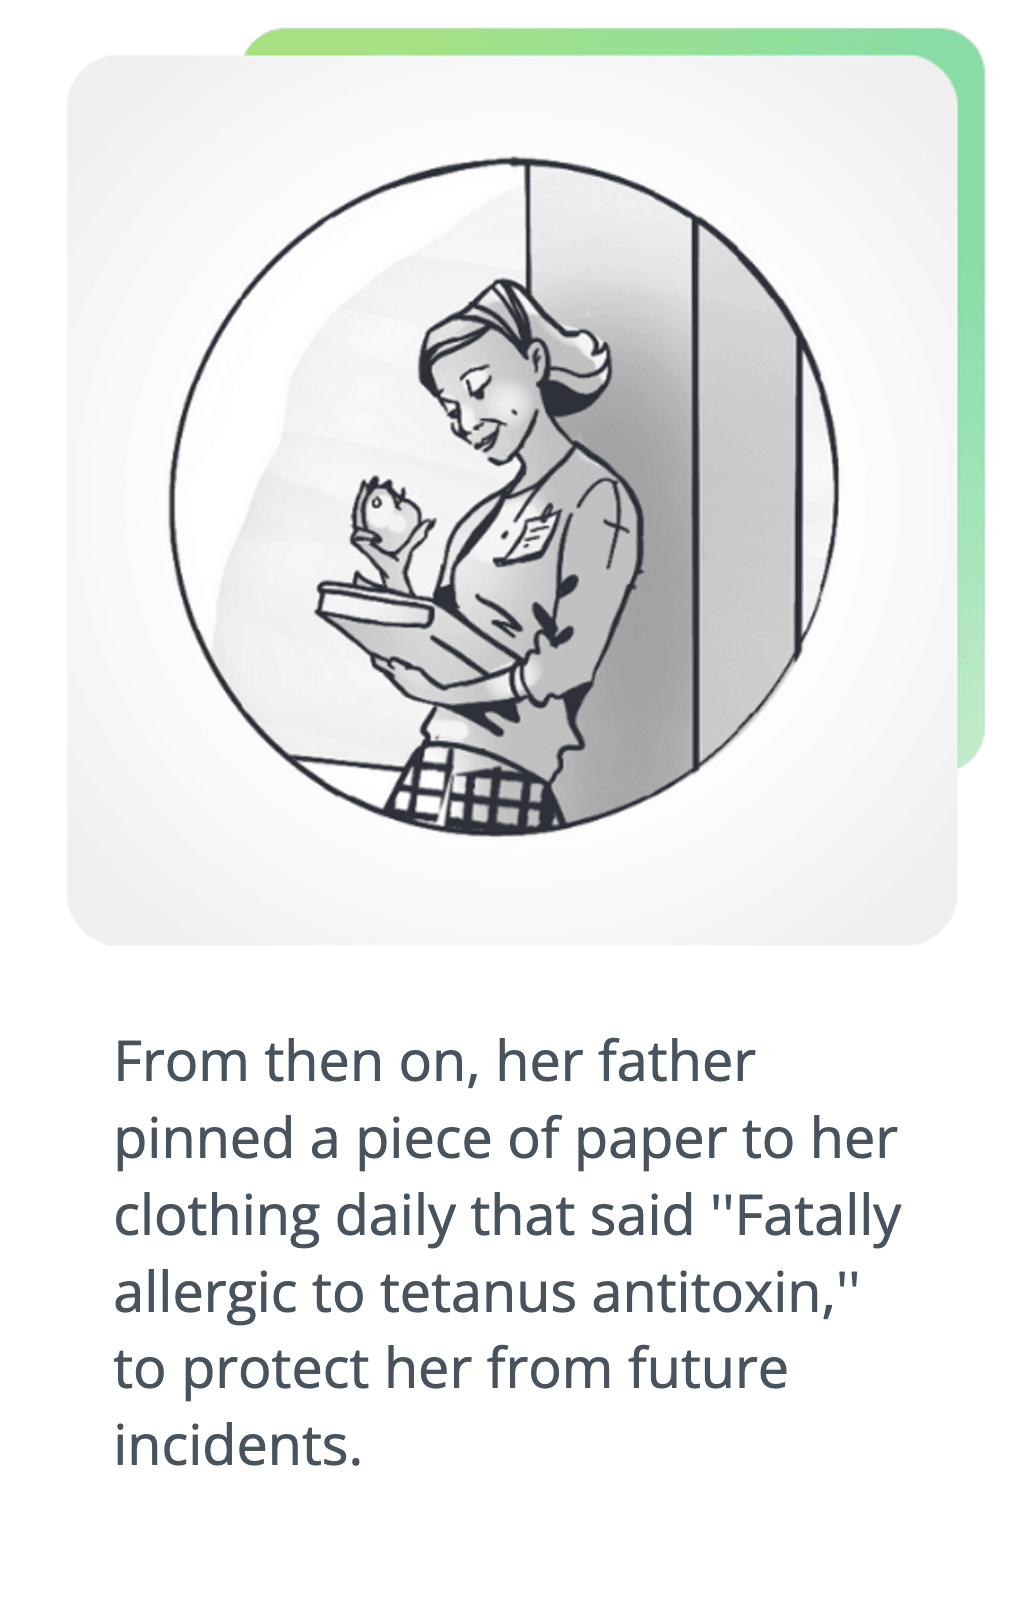 Drawing of woman holding a book and an apple - script says: From then on, her father pinned a piece of paper to her clothing daily that said ''Fatally allergic to tetanus antitoxin,'' to protect her from future incidents.